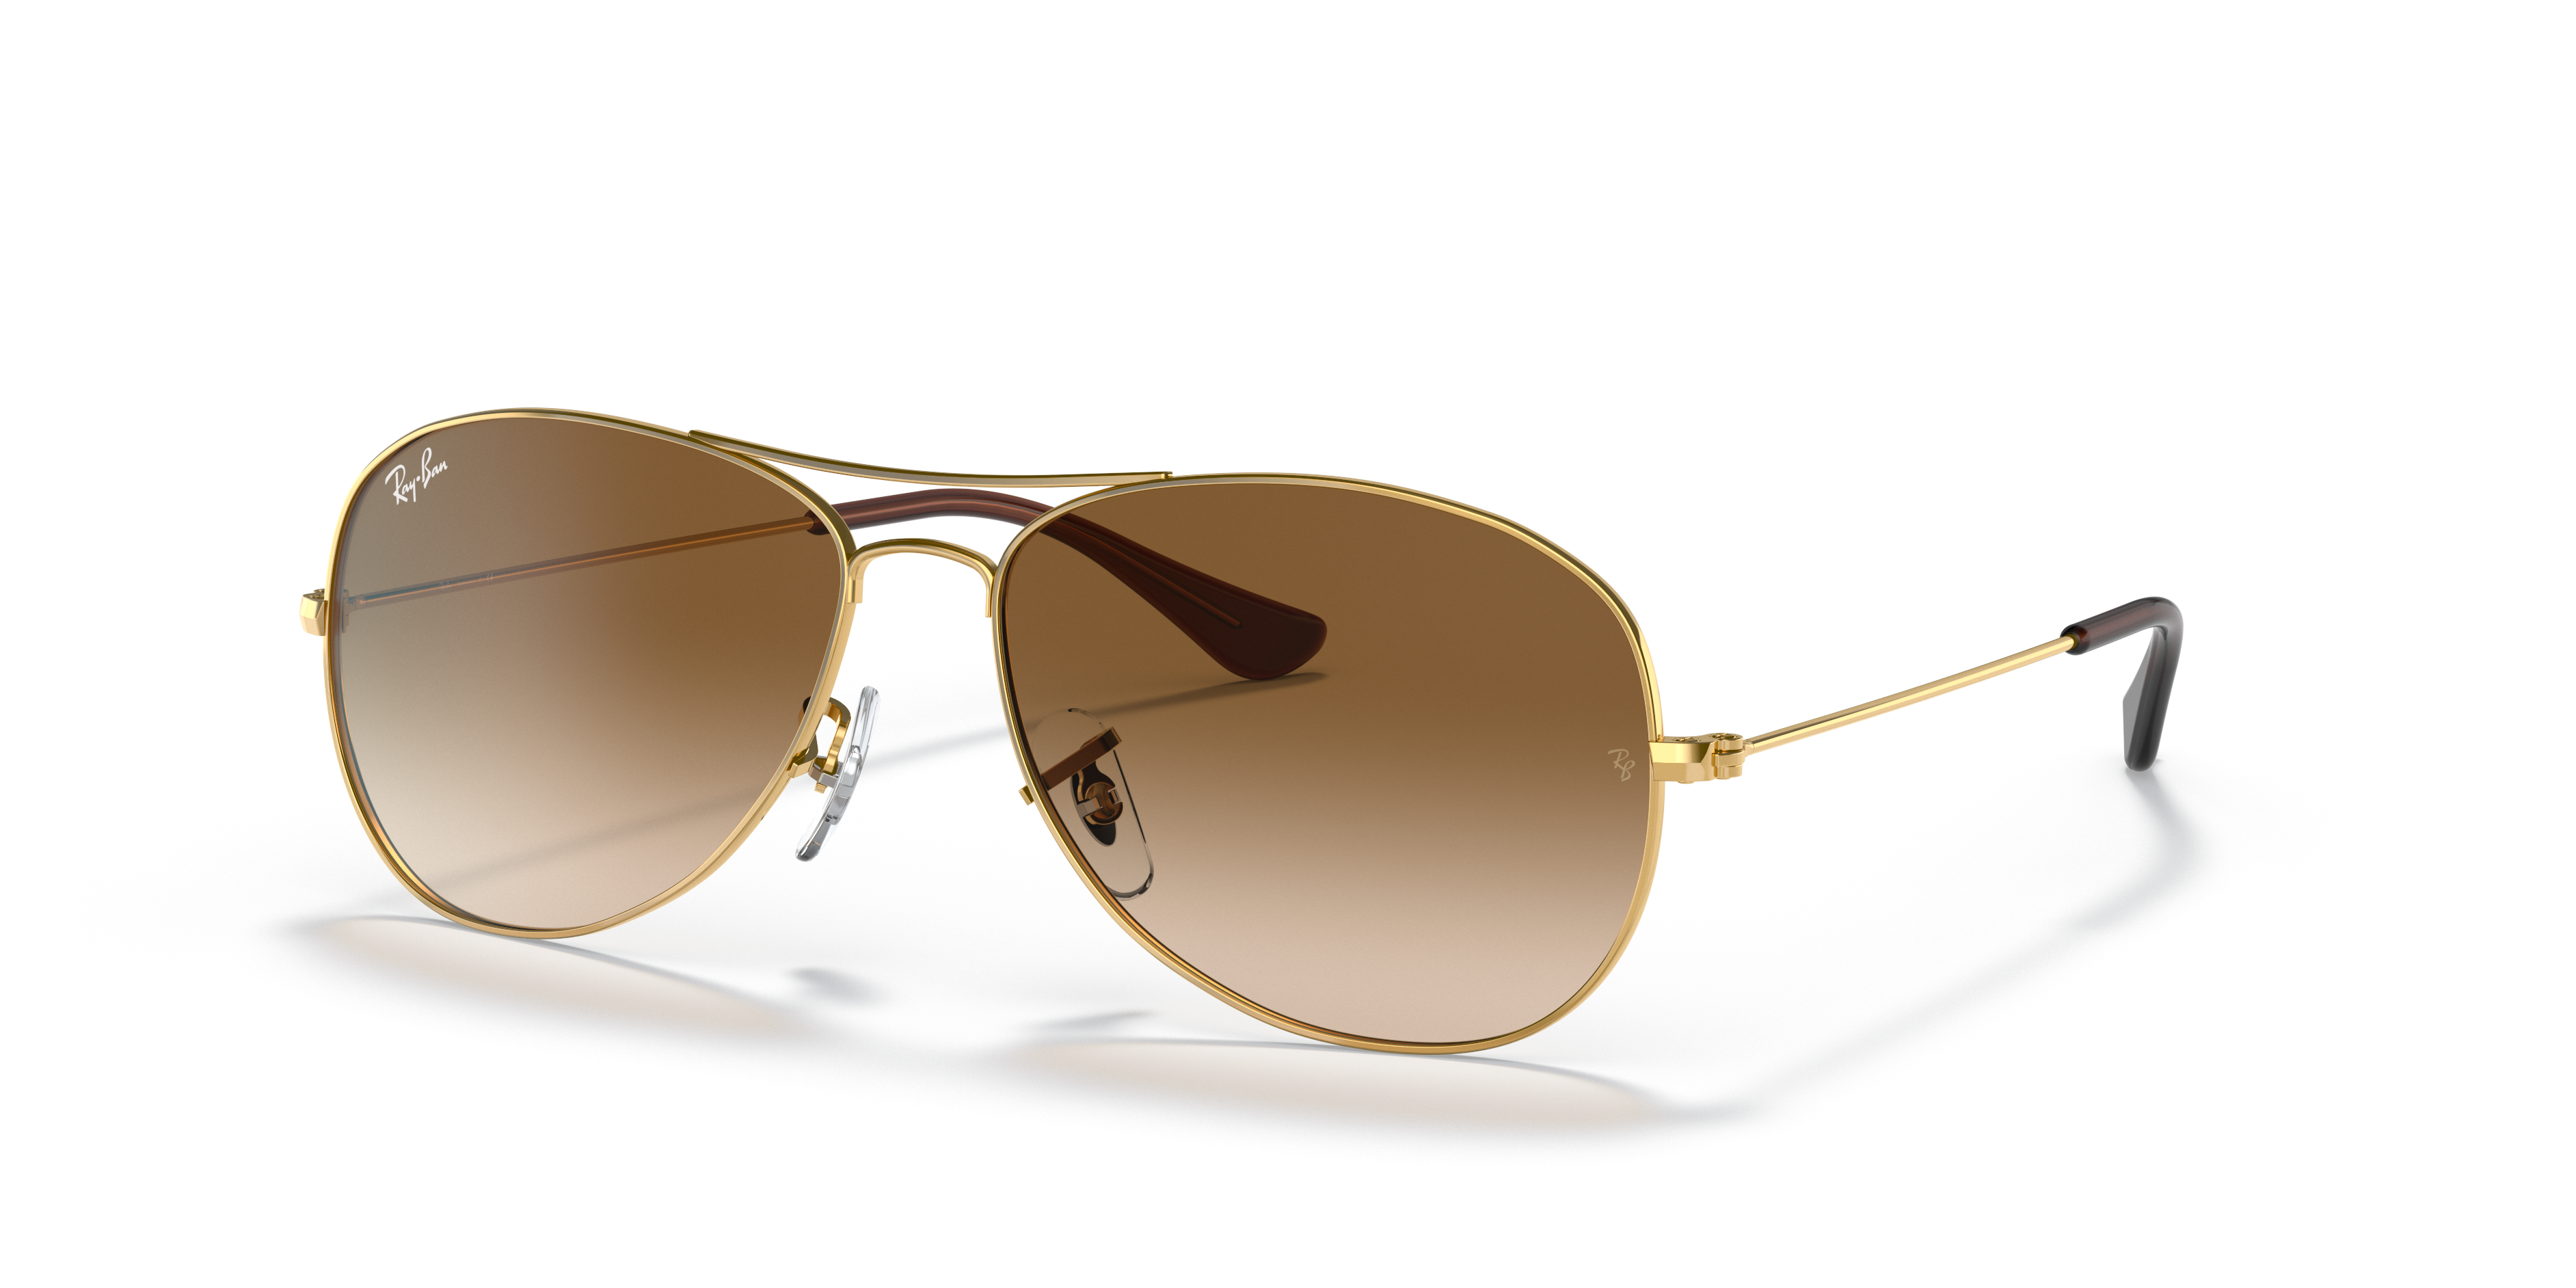 Rb3549 Sunglasses in Gold and Brown | Ray-Ban®